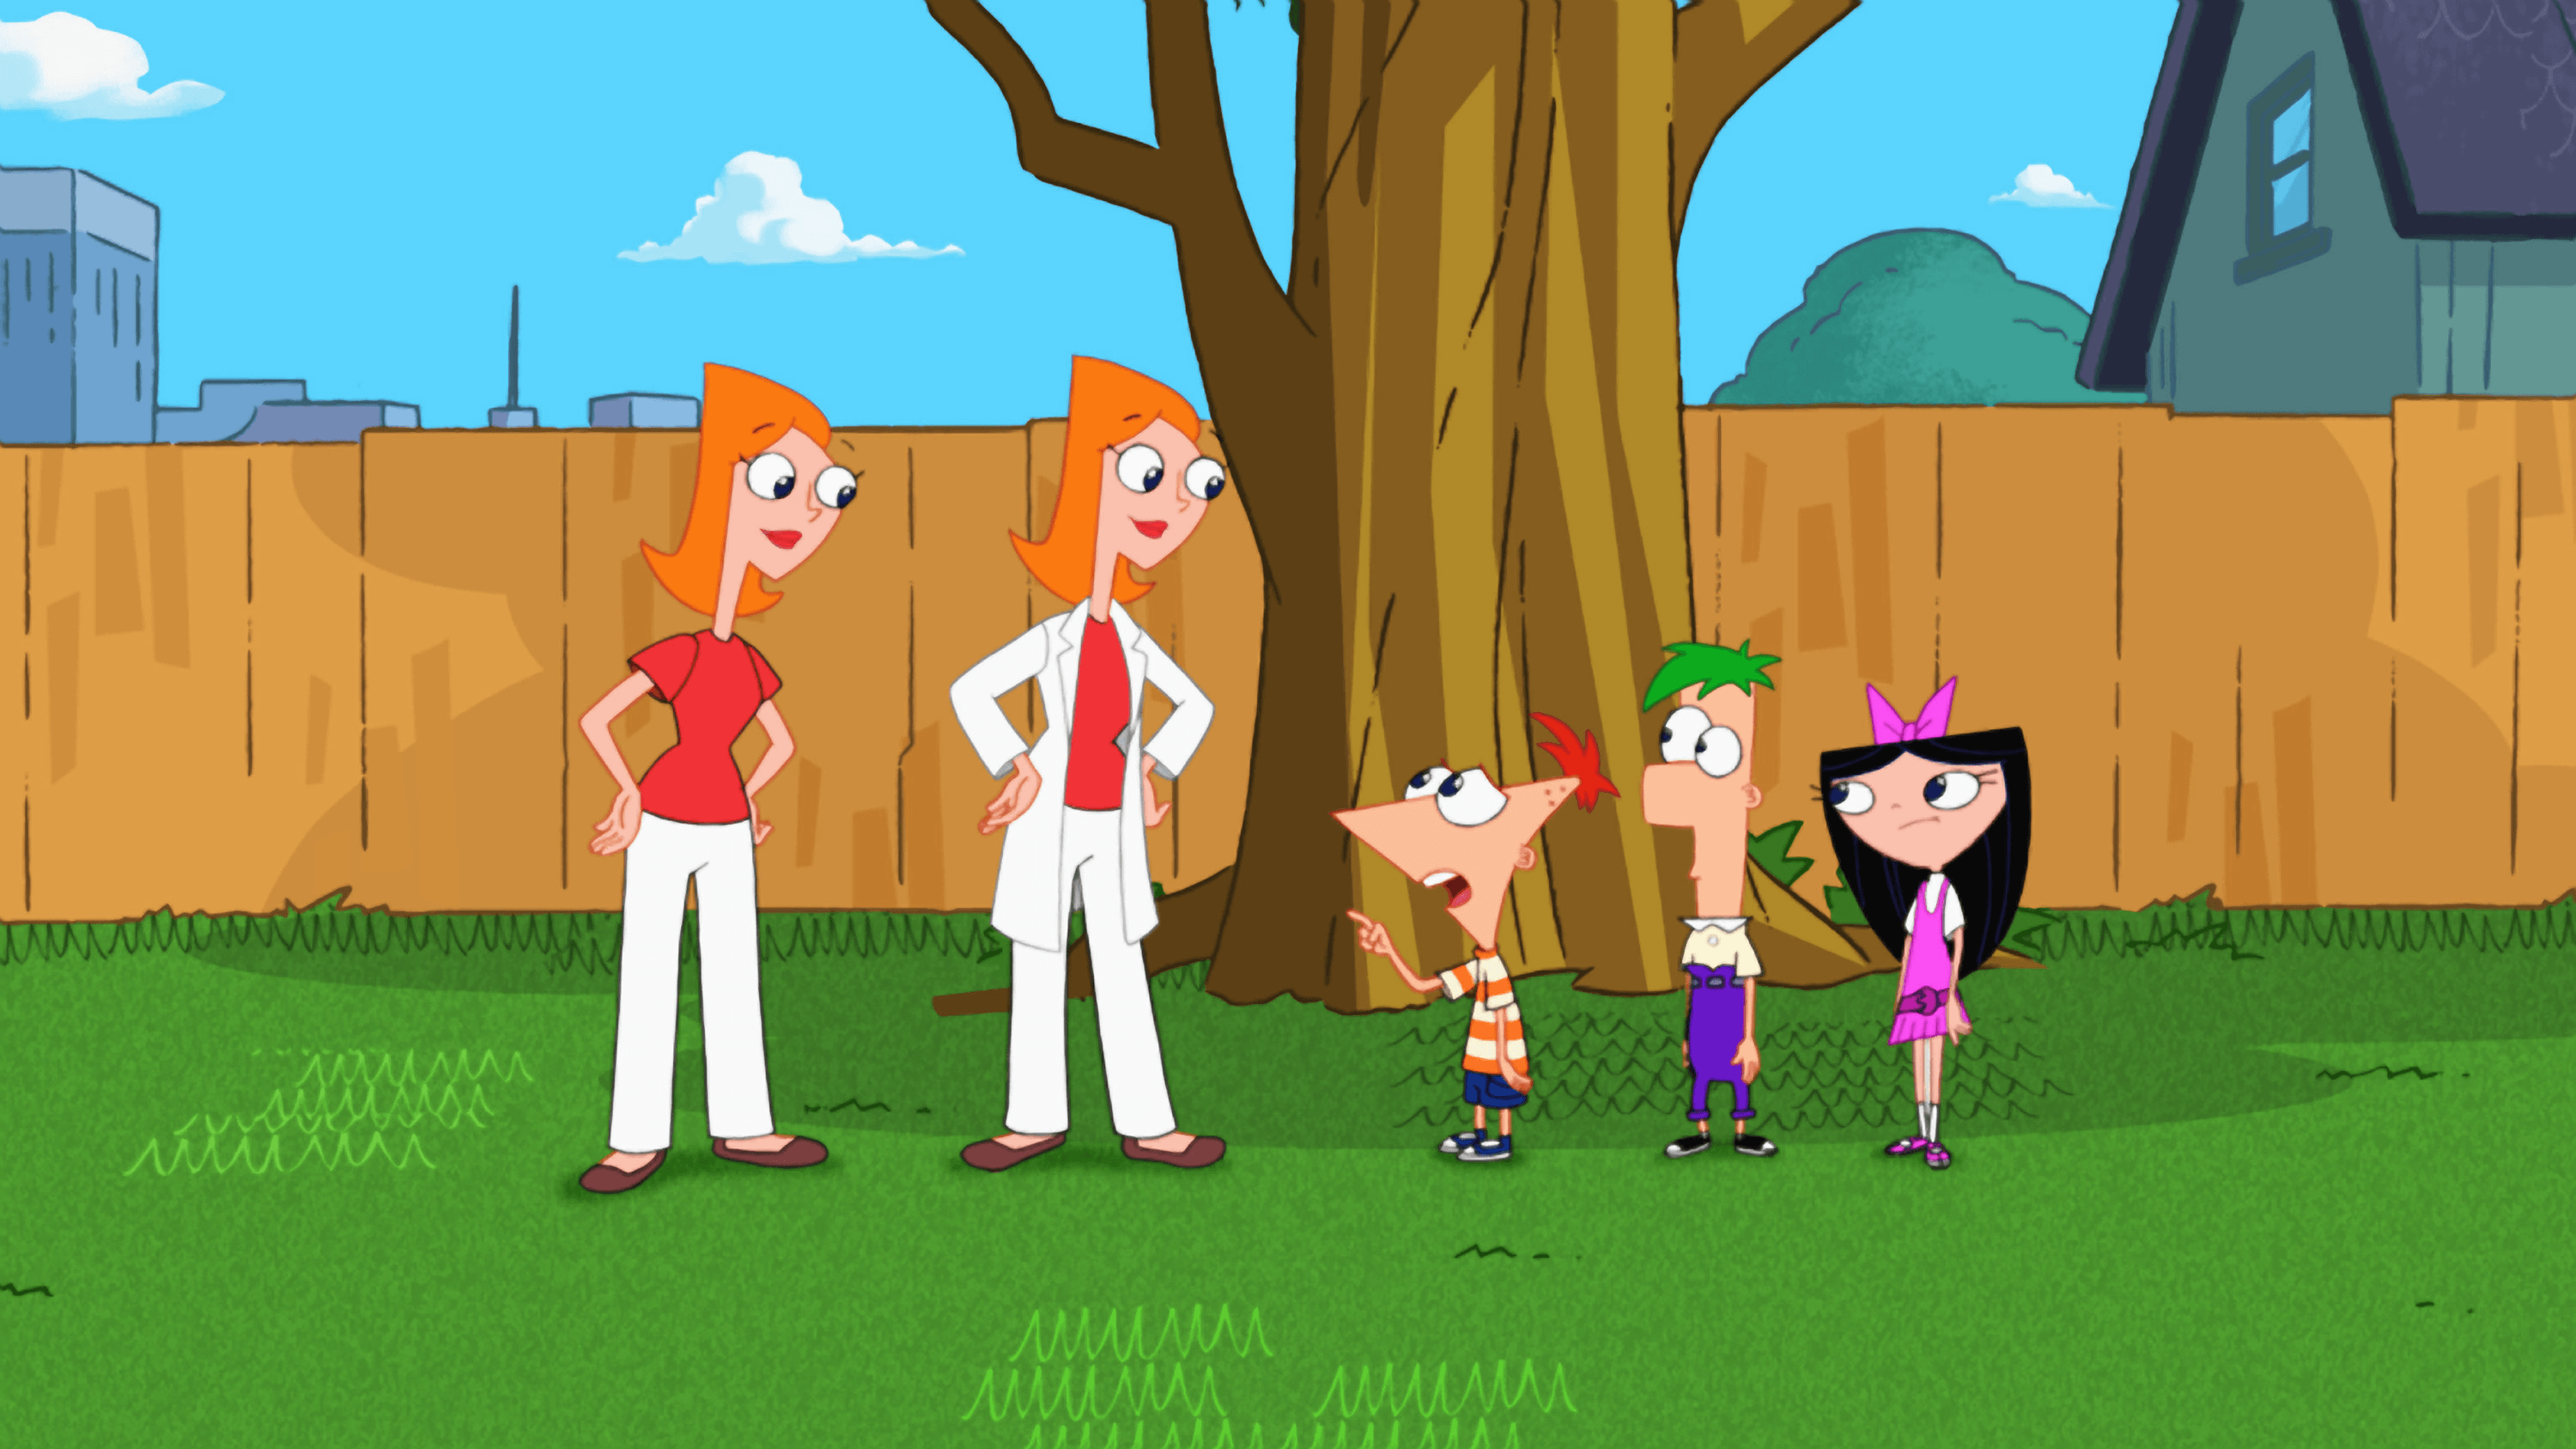 Phineas and Ferb Theme for Windows 10